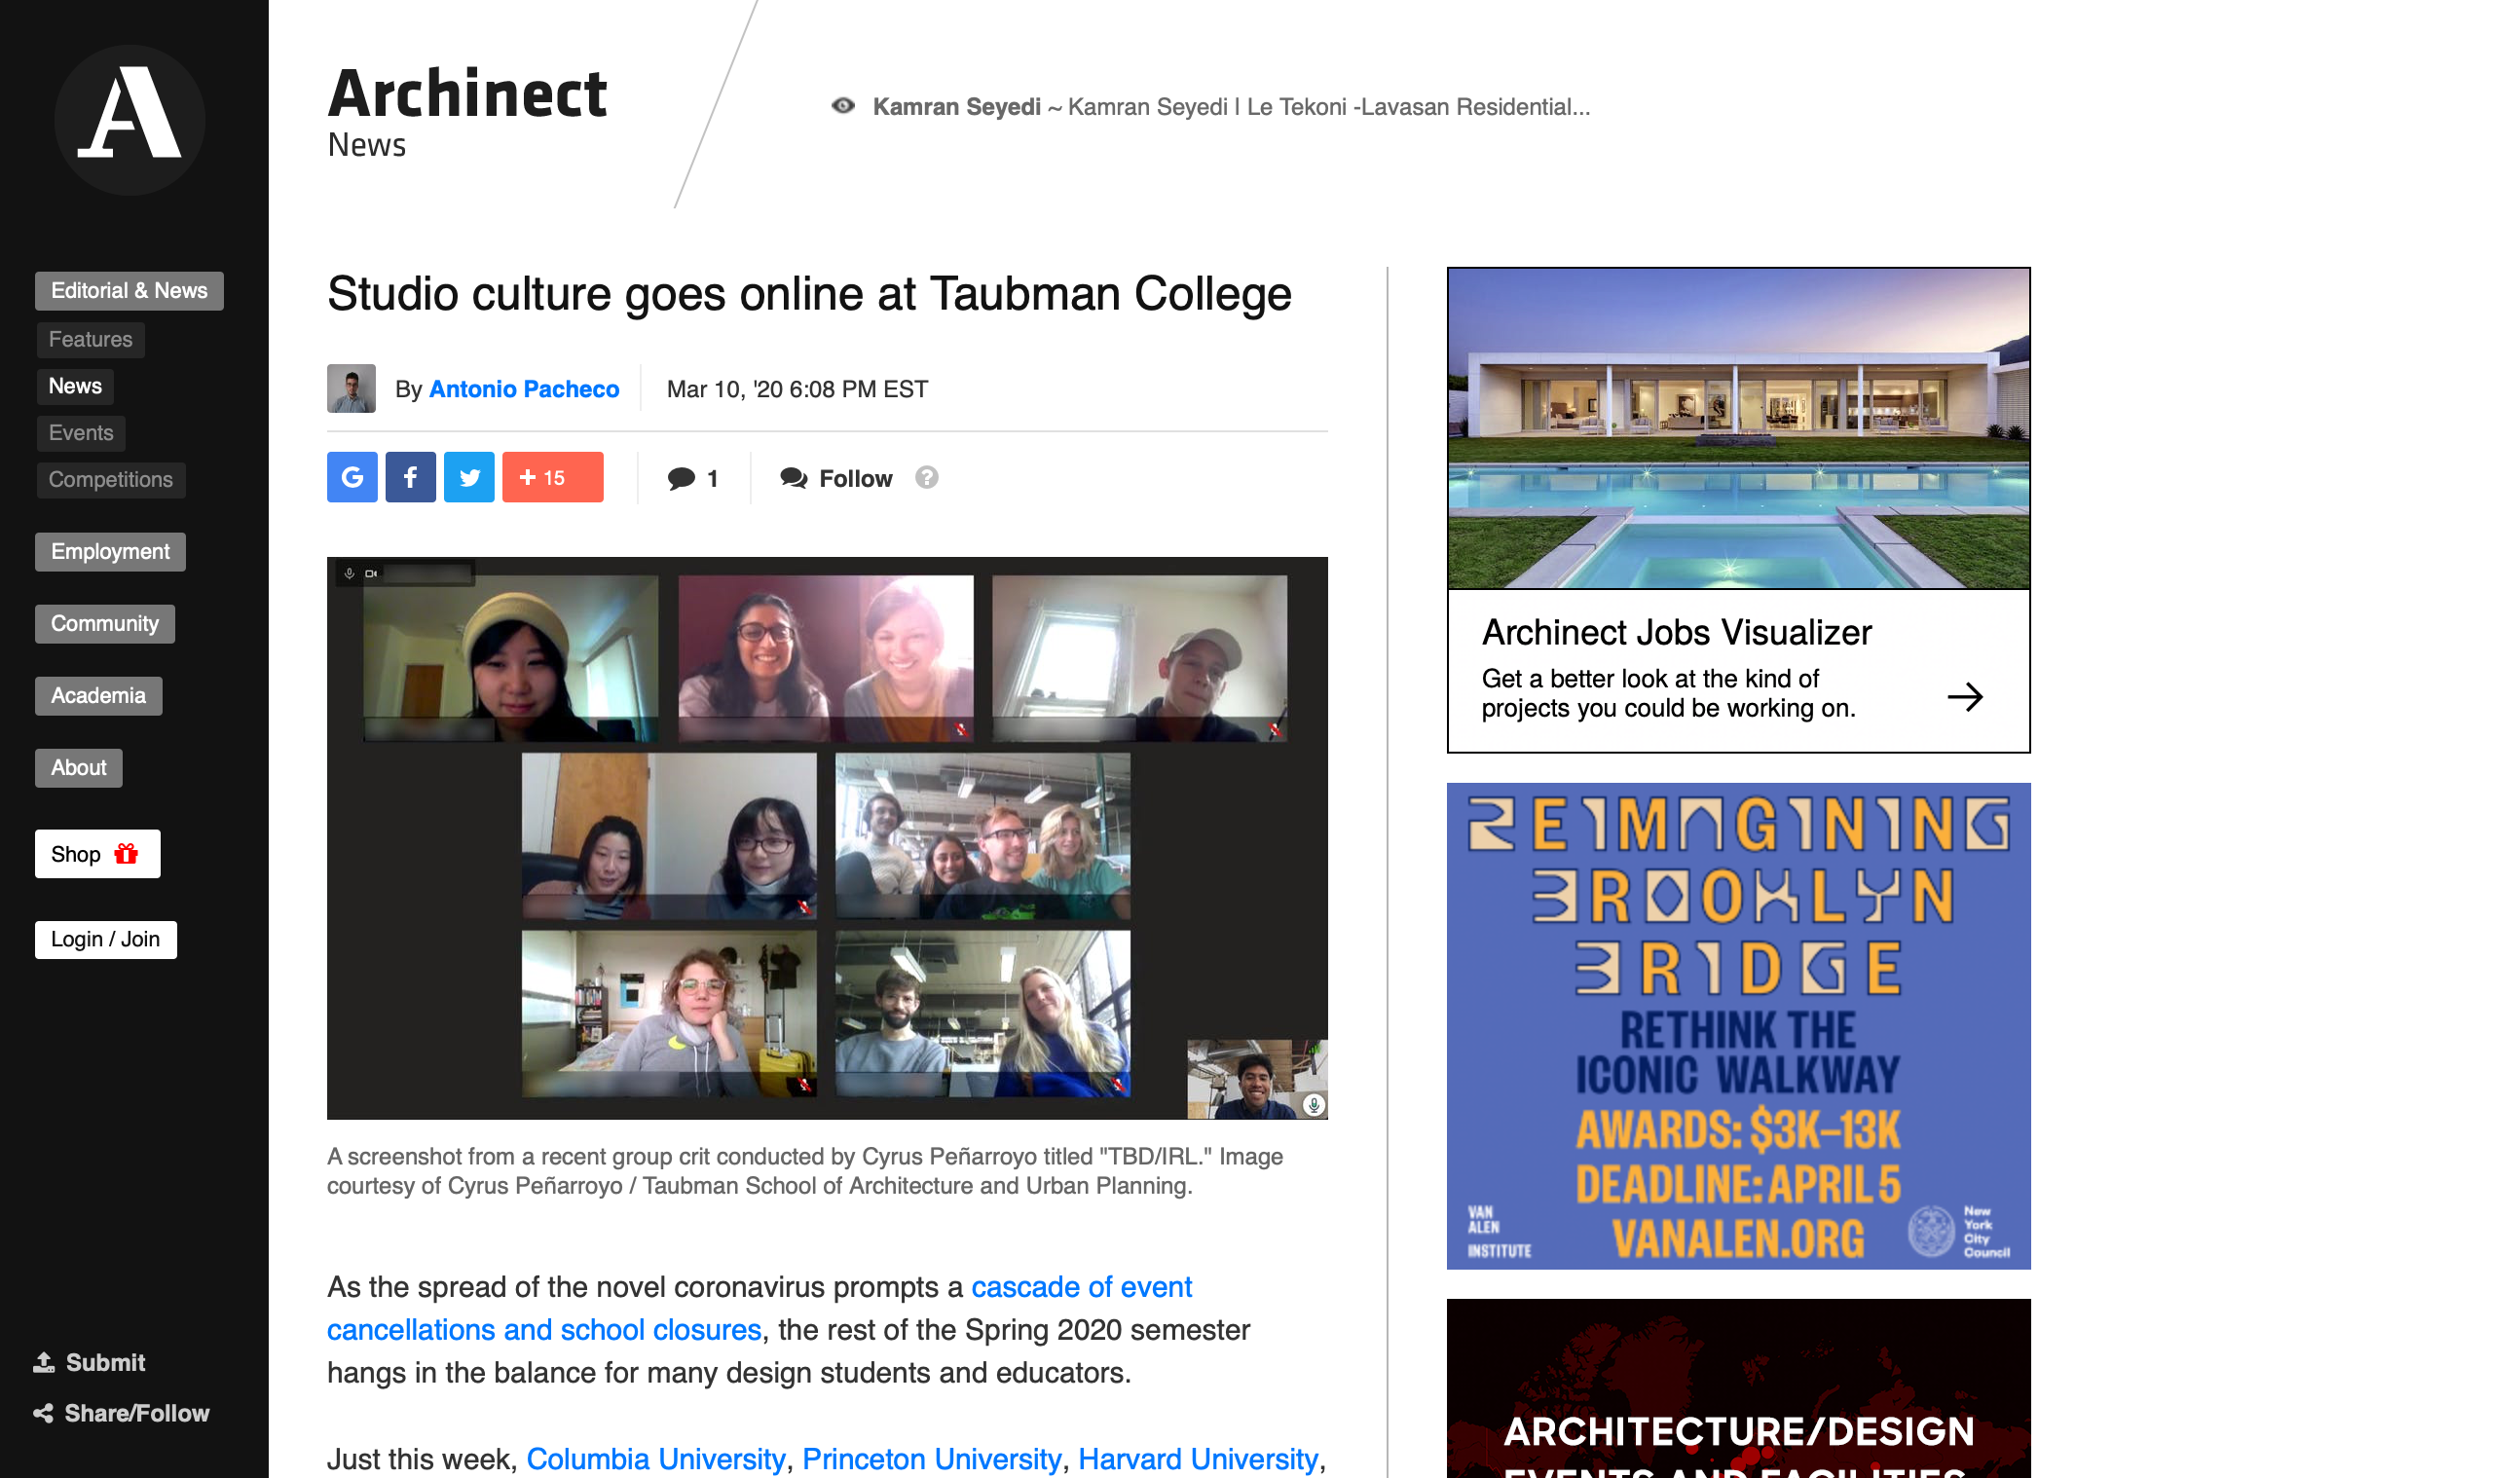 Studio culture goes online at Taubman College